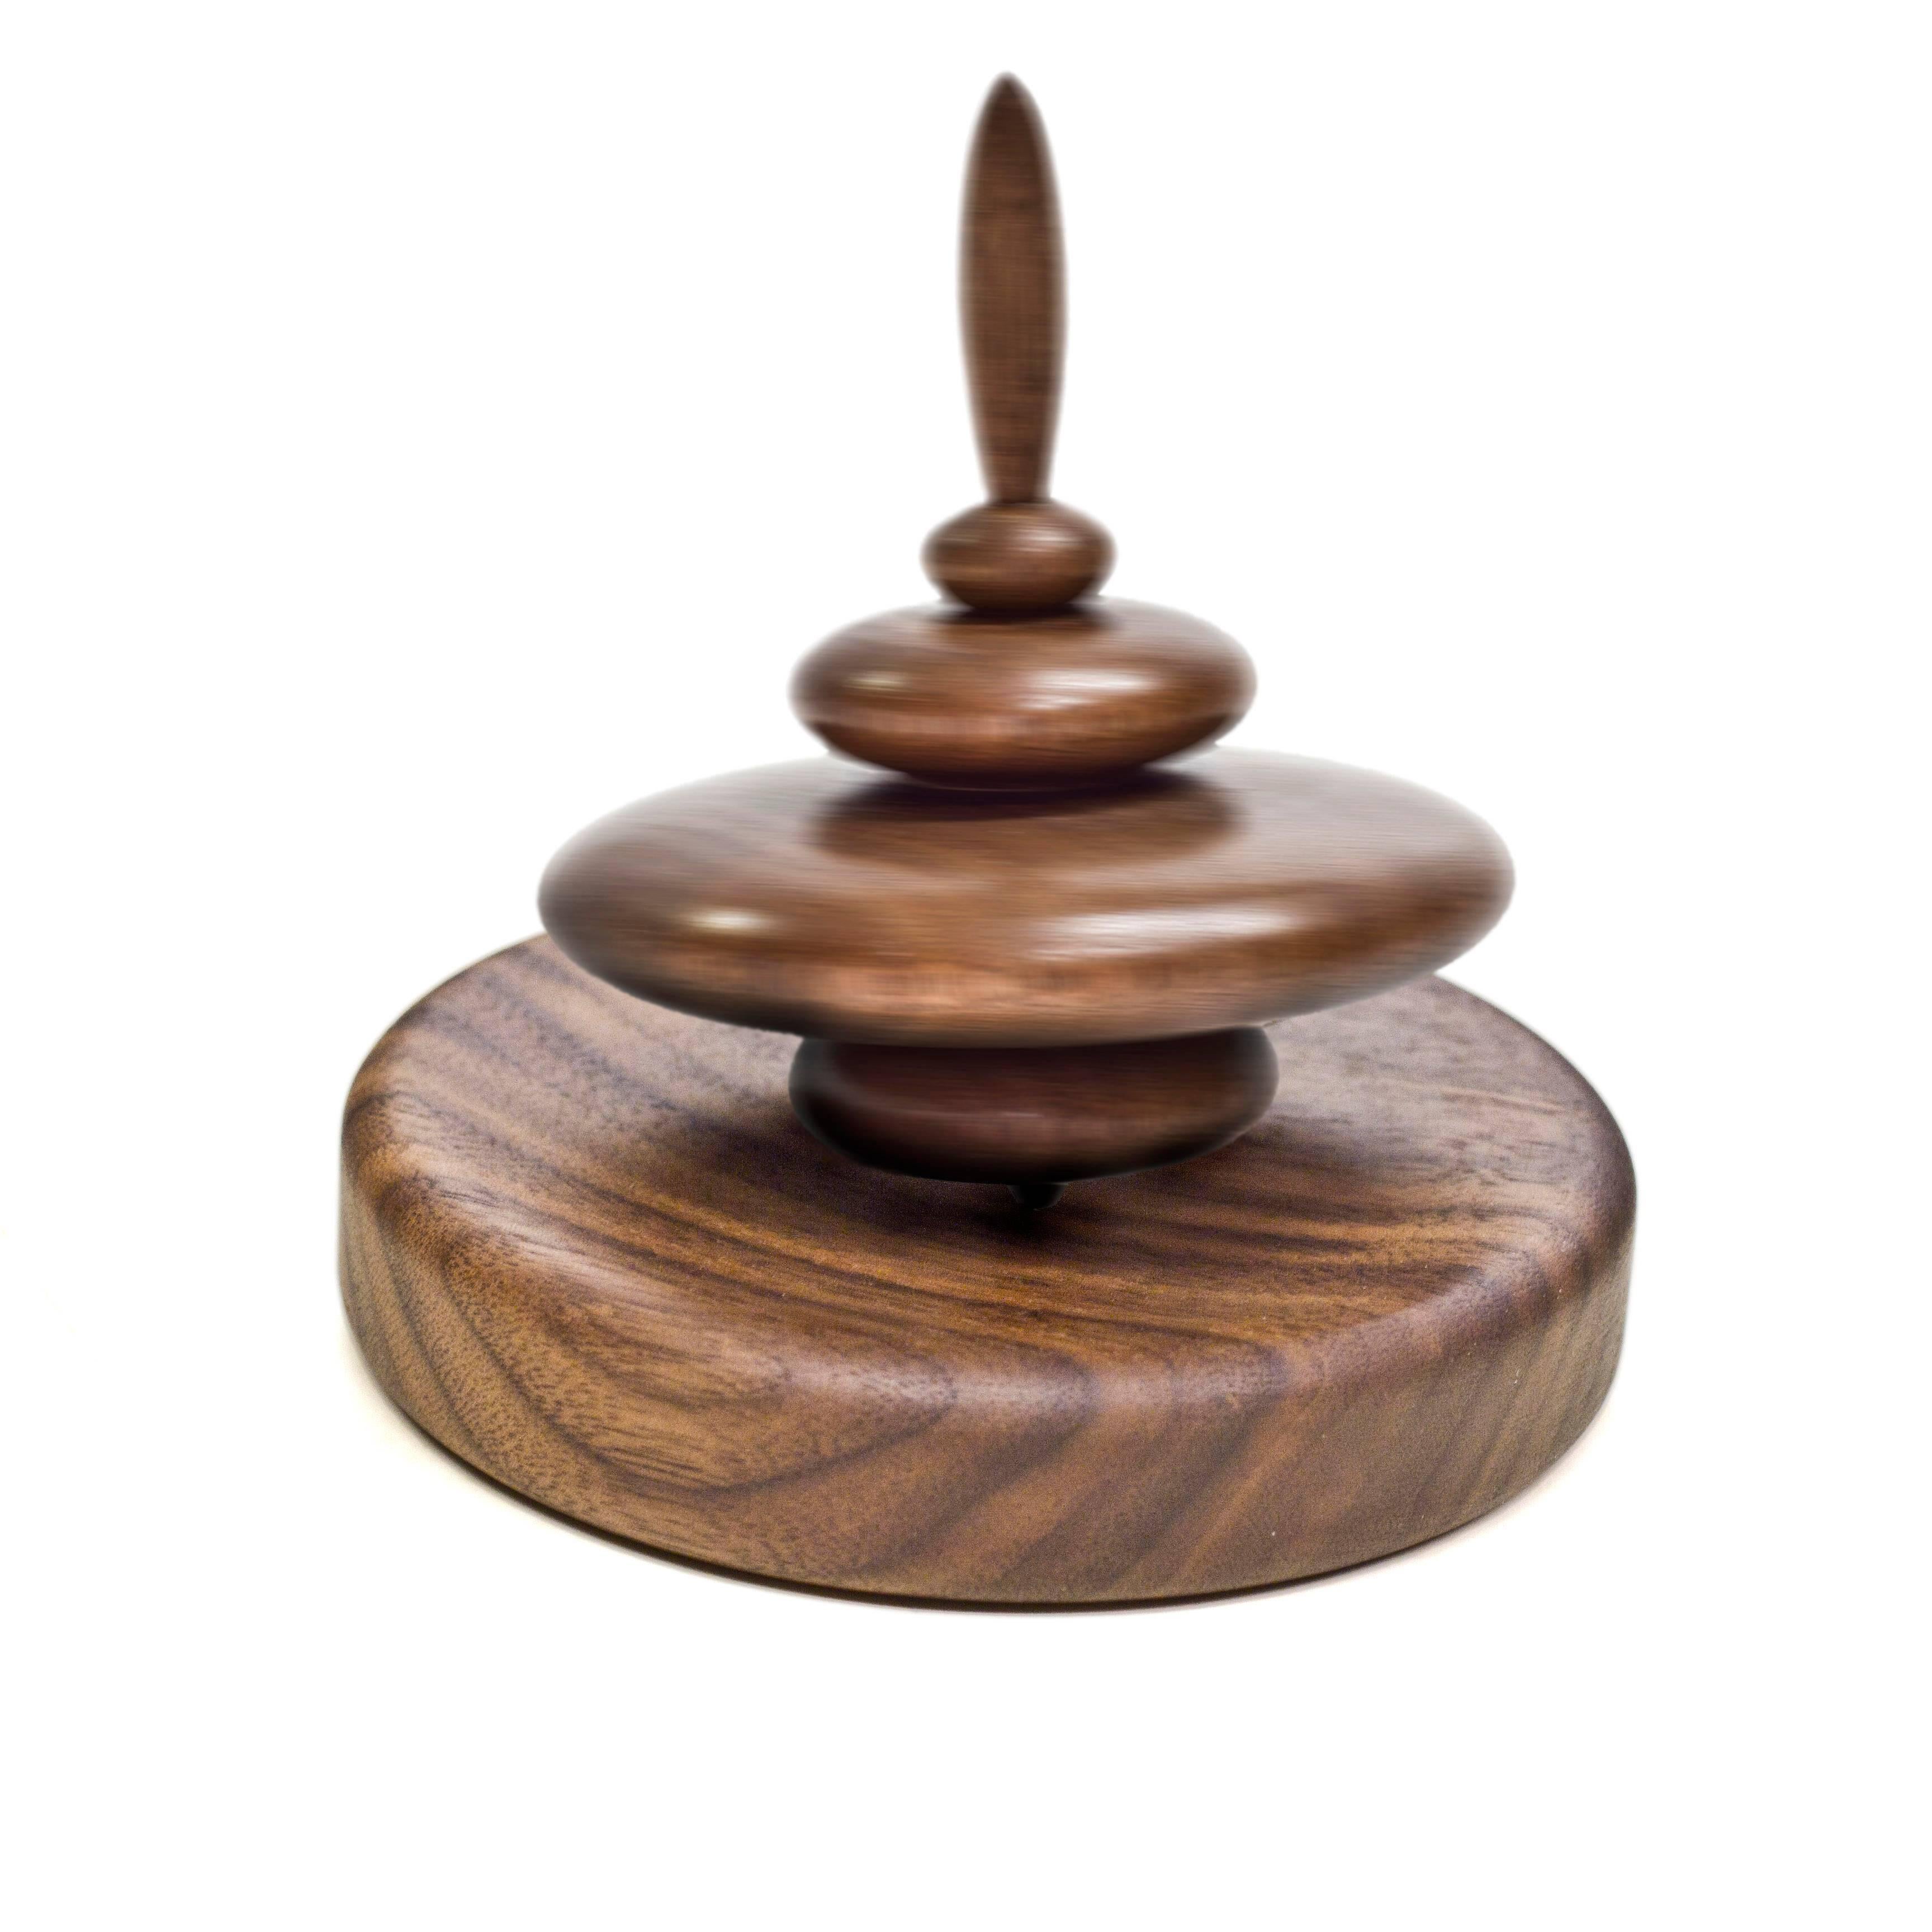 American Set of 3 Small Elemental Spinning Tops in Oiled Walnut by Alvaro Uribe for Wooda For Sale